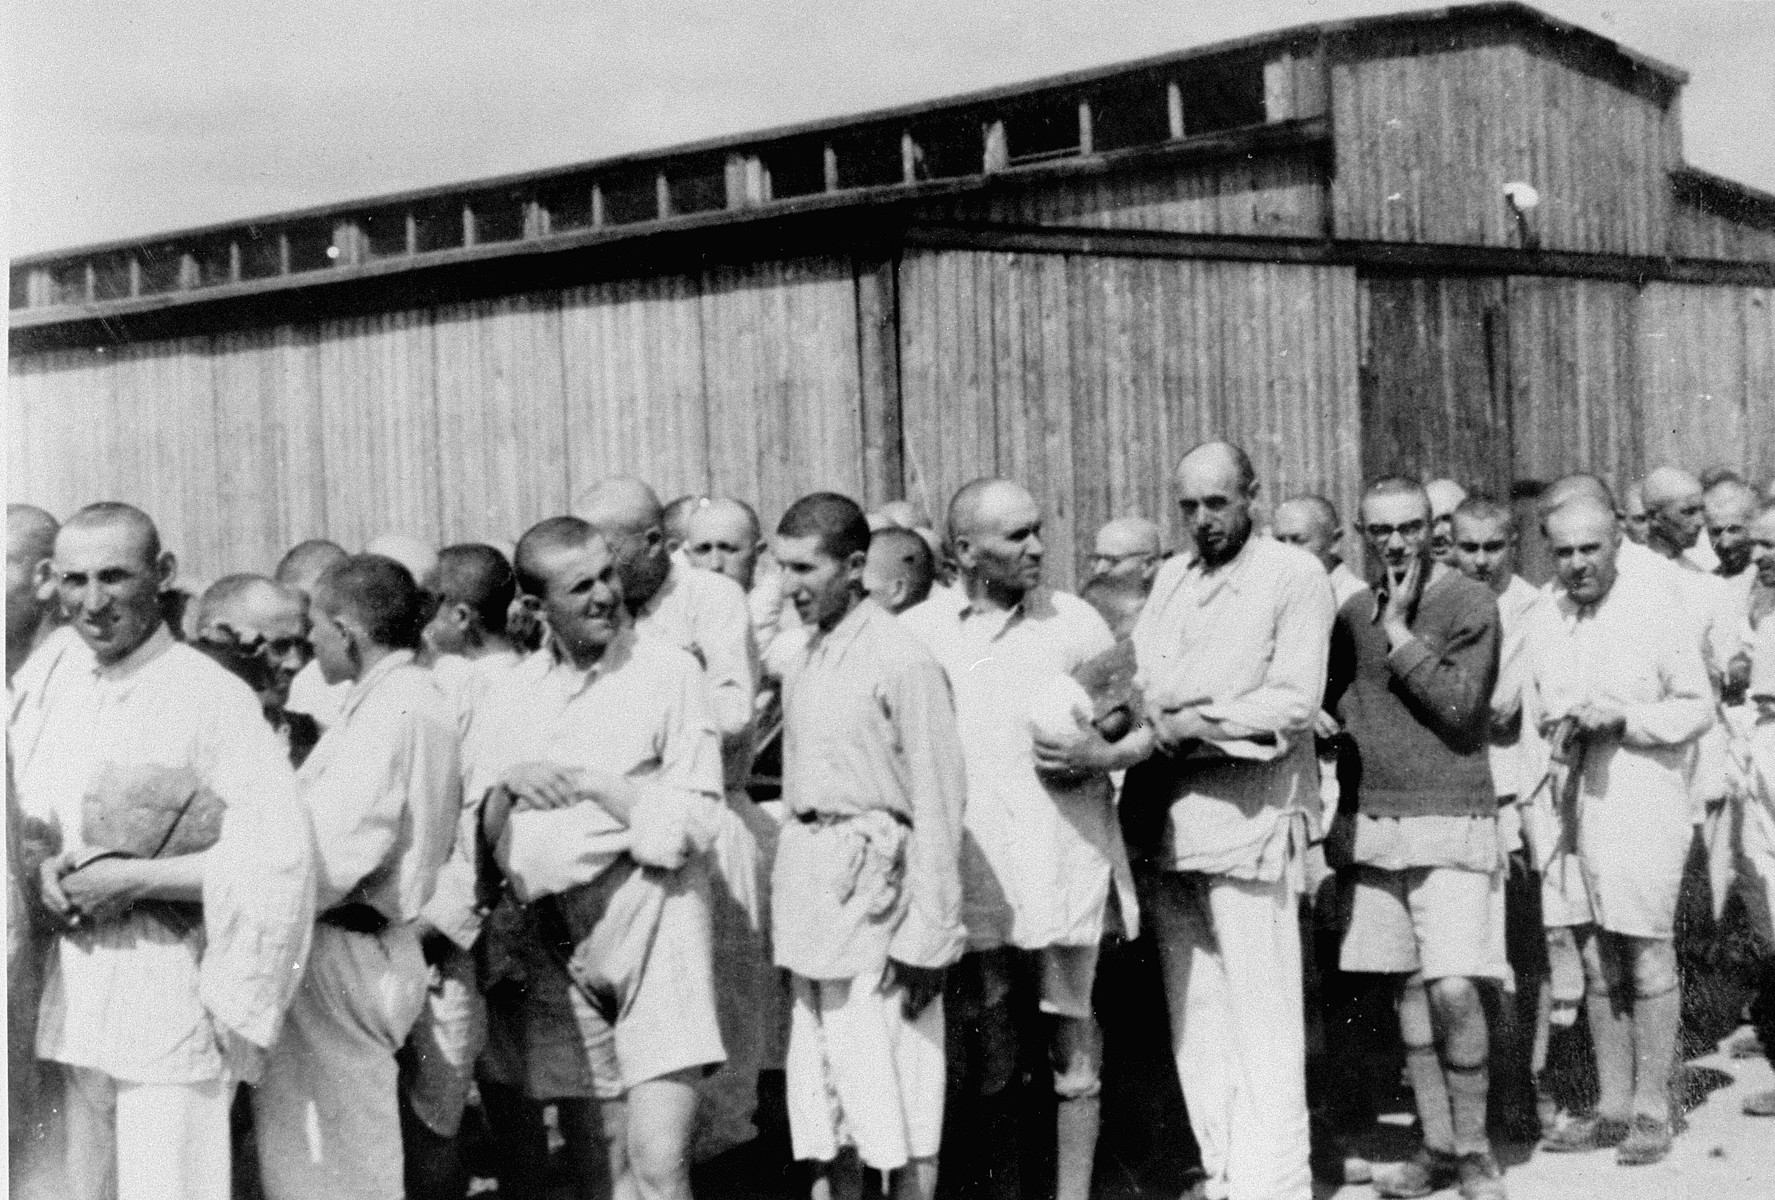 Jewish men from Subcarpathian Rus who have been, selected for forced labor at Auschwitz-Birkenau, await further processing after having been disinfected and issued underclothing. 

Those pictured include Zoltan Hoffman and his son Herschel.